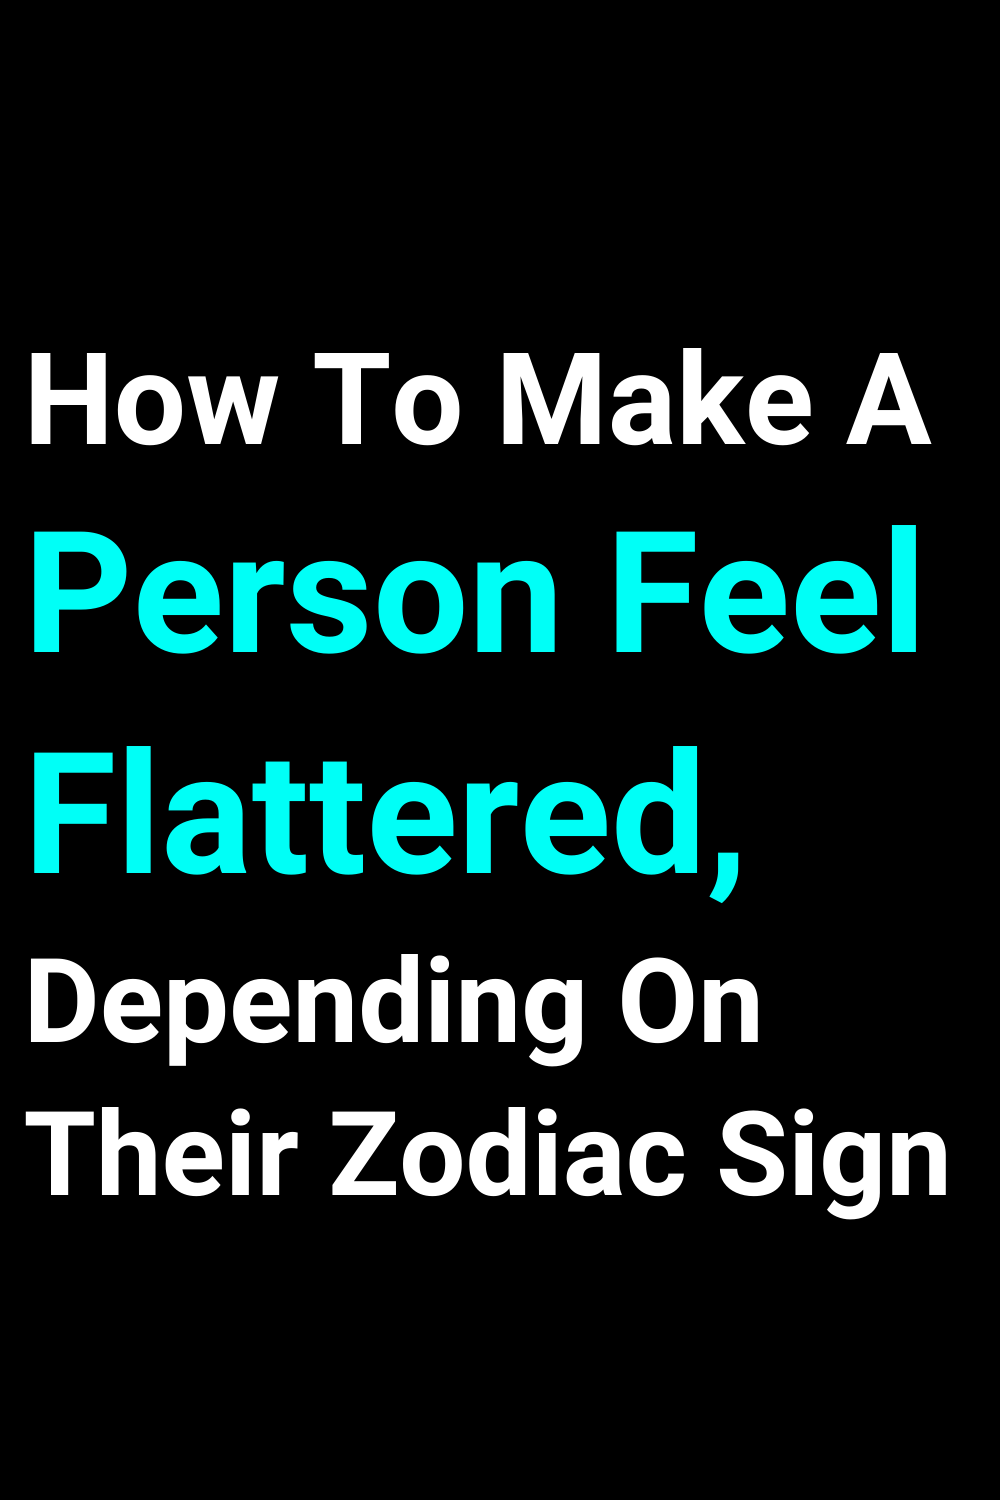 How To Make A Person Feel Flattered, Depending On Their Zodiac Sign